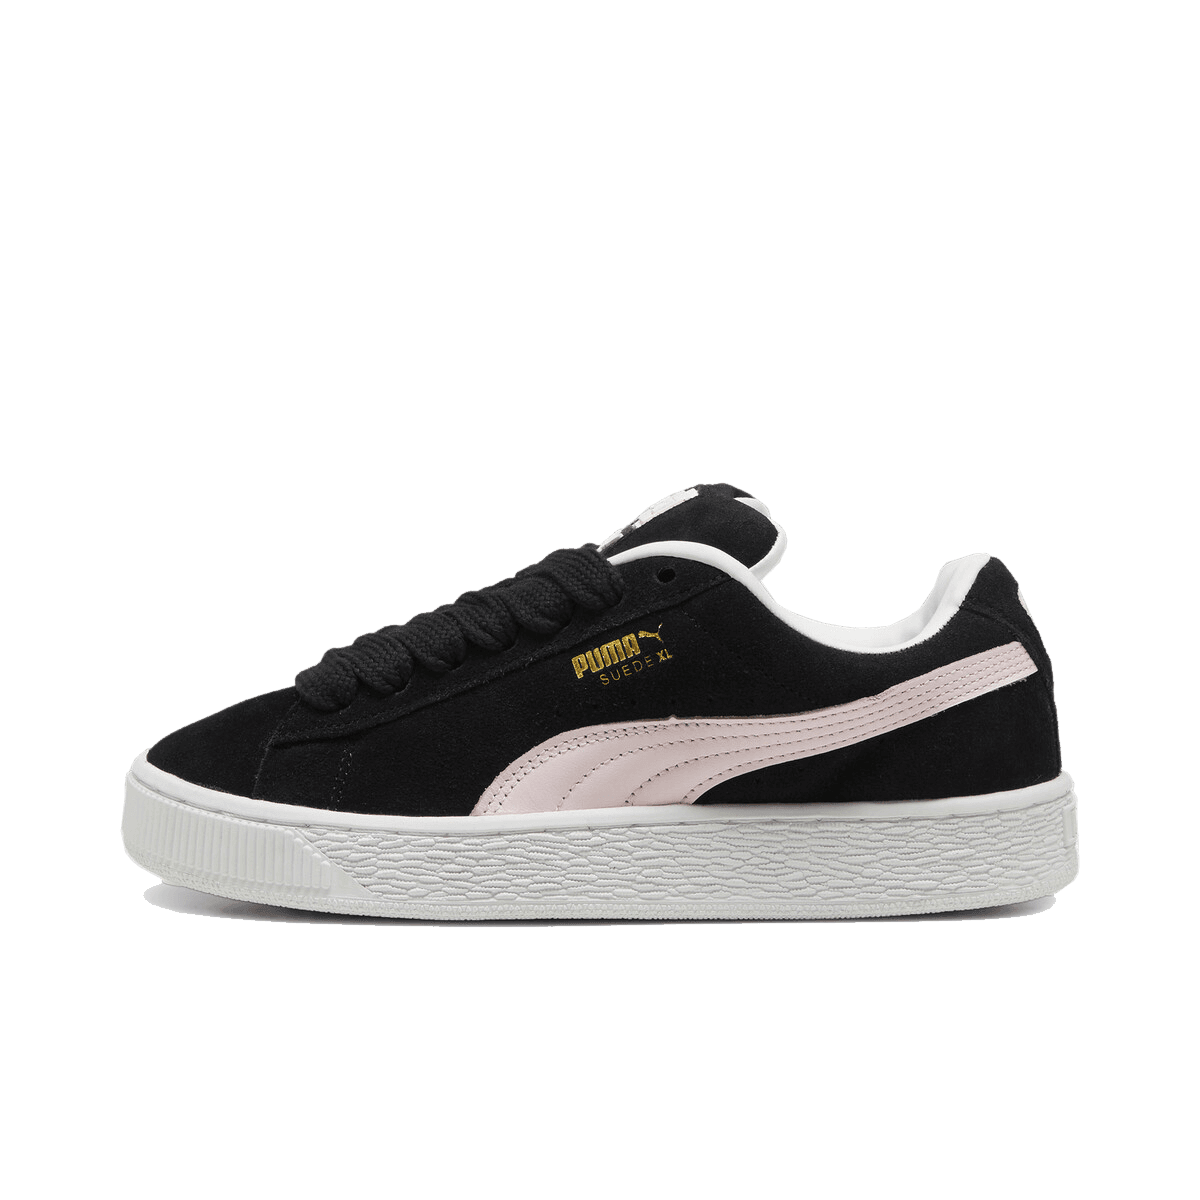 Puma Suede XL 'Whisp Of Pink'